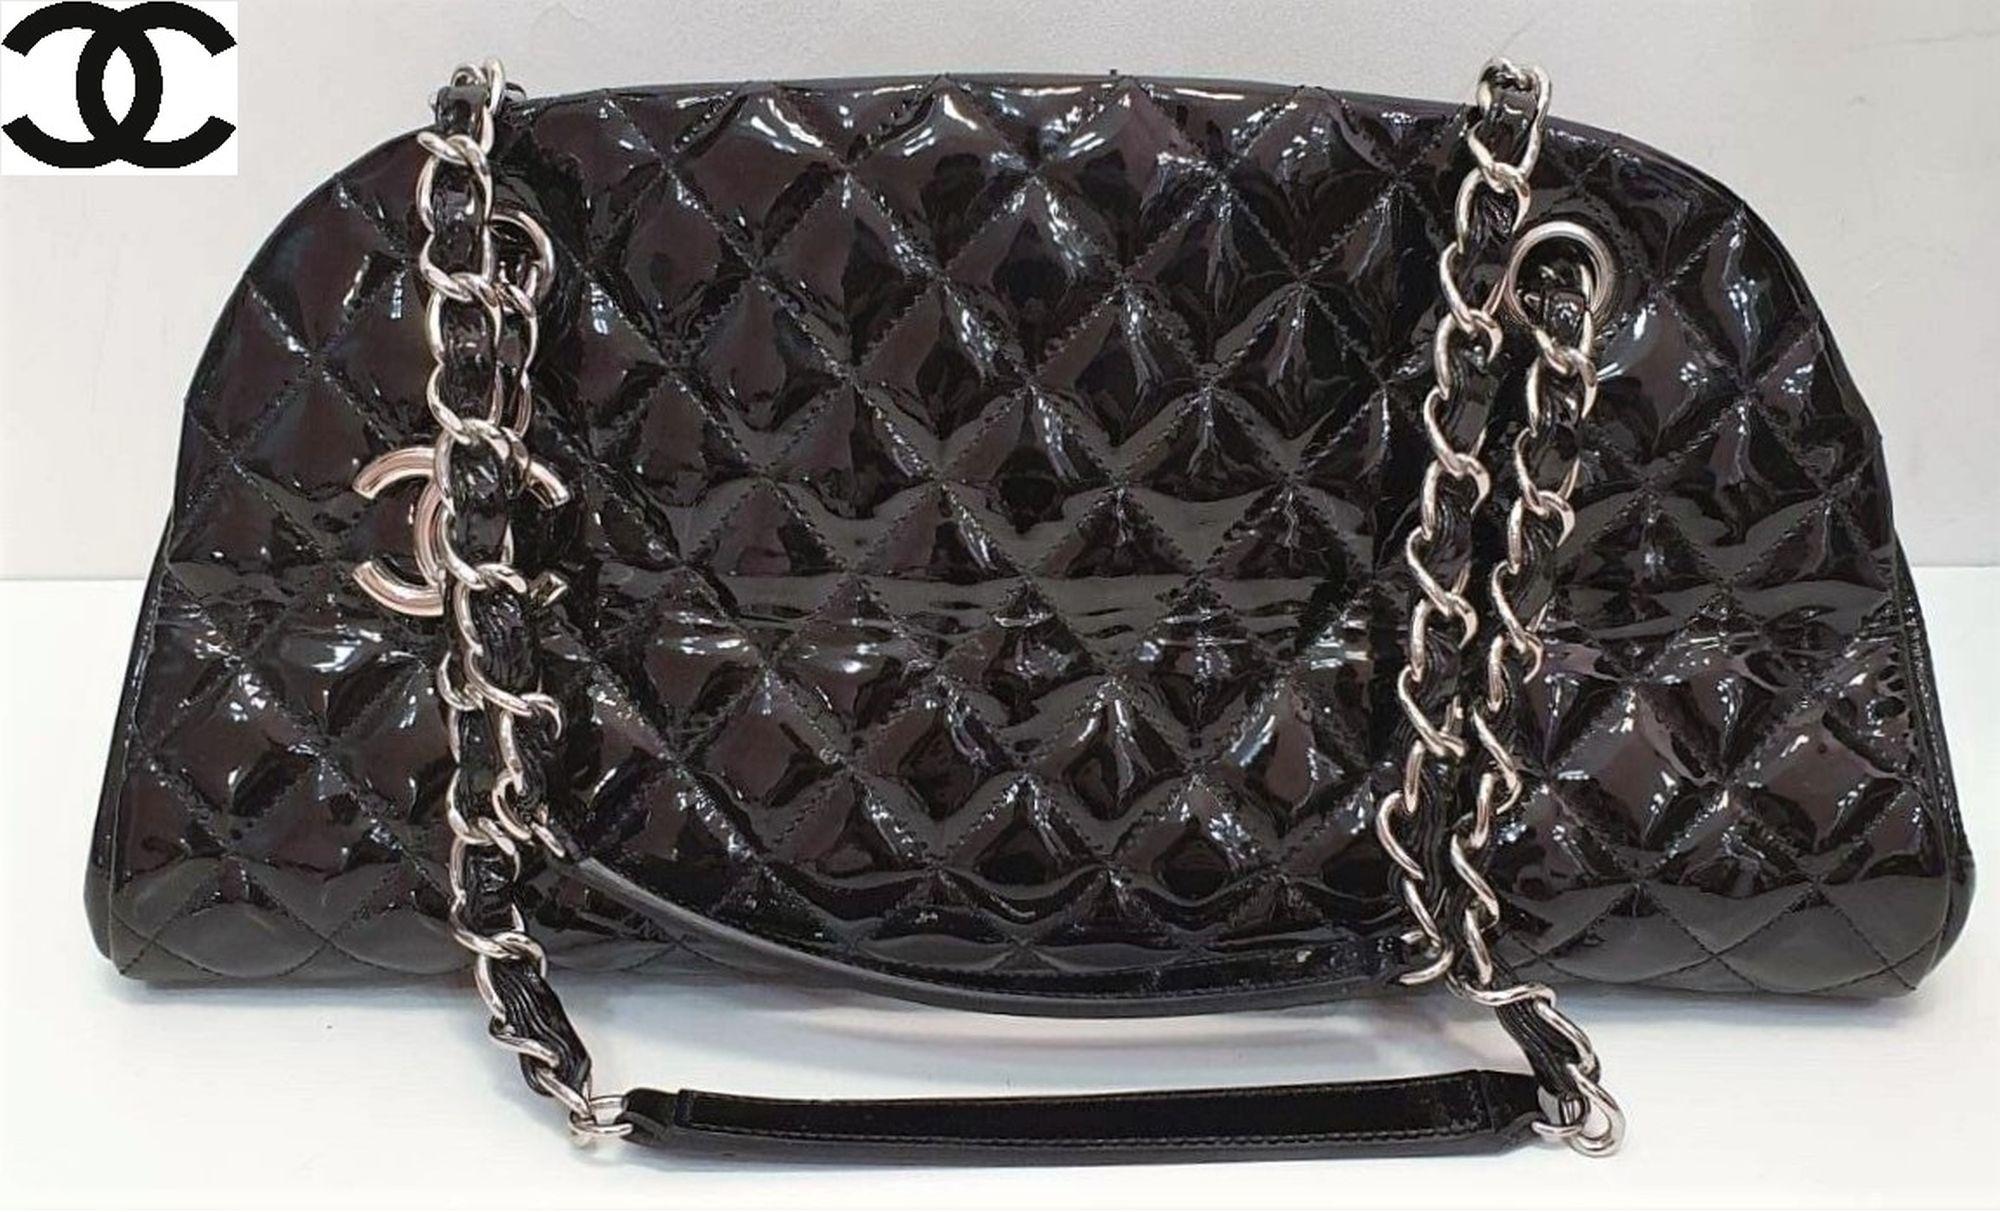 Classic Vintage Chanel Patent Leather Quilted Shoulder Bag In Excellent Condition For Sale In Pasadena, CA